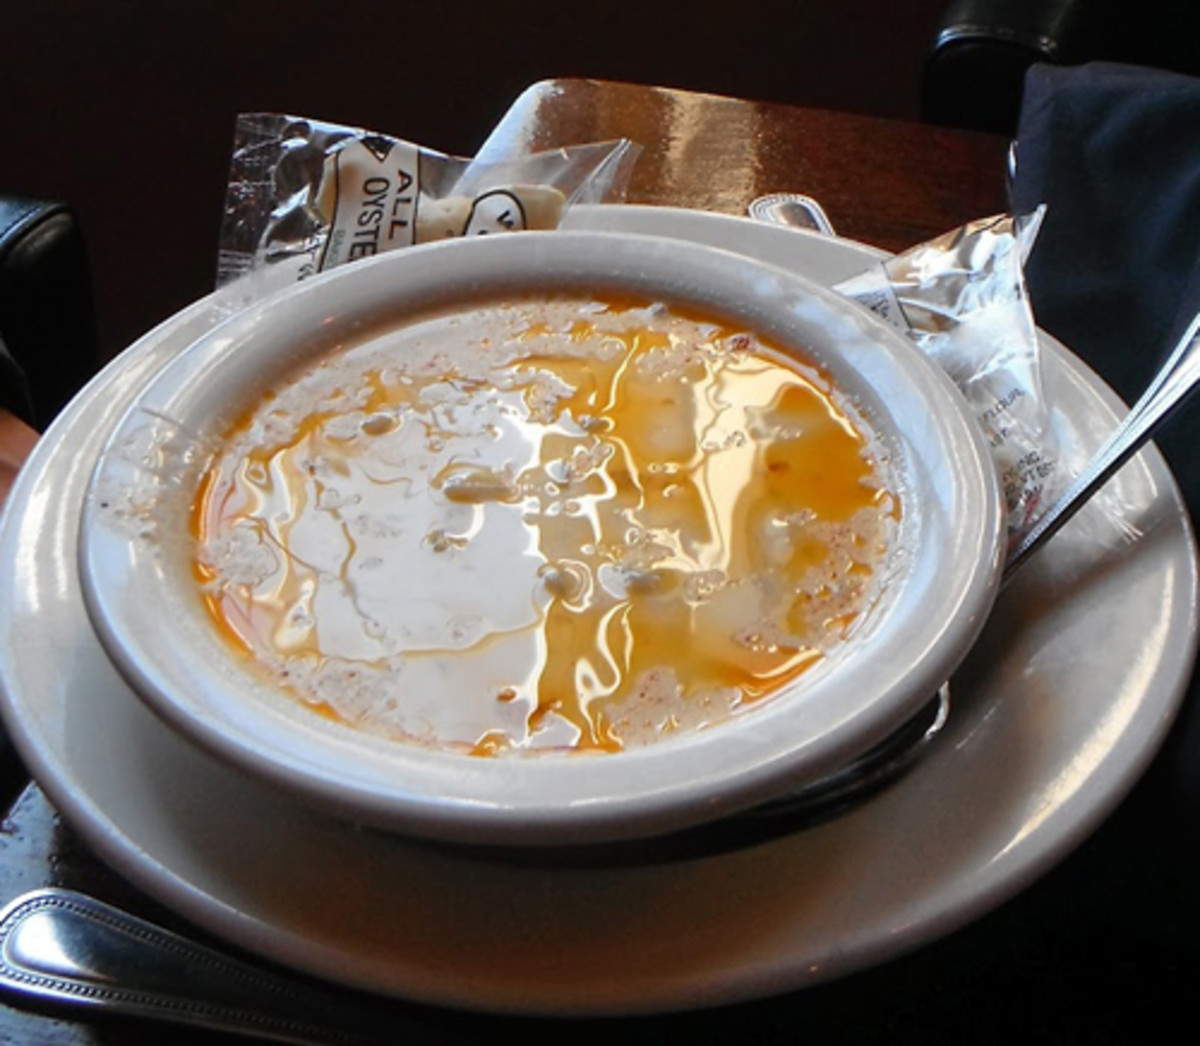 The clam chowder at The Grog in Newburyport, Massachusetts, is renowned in the region. Note how the butter floats on the surface of the creamy broth.